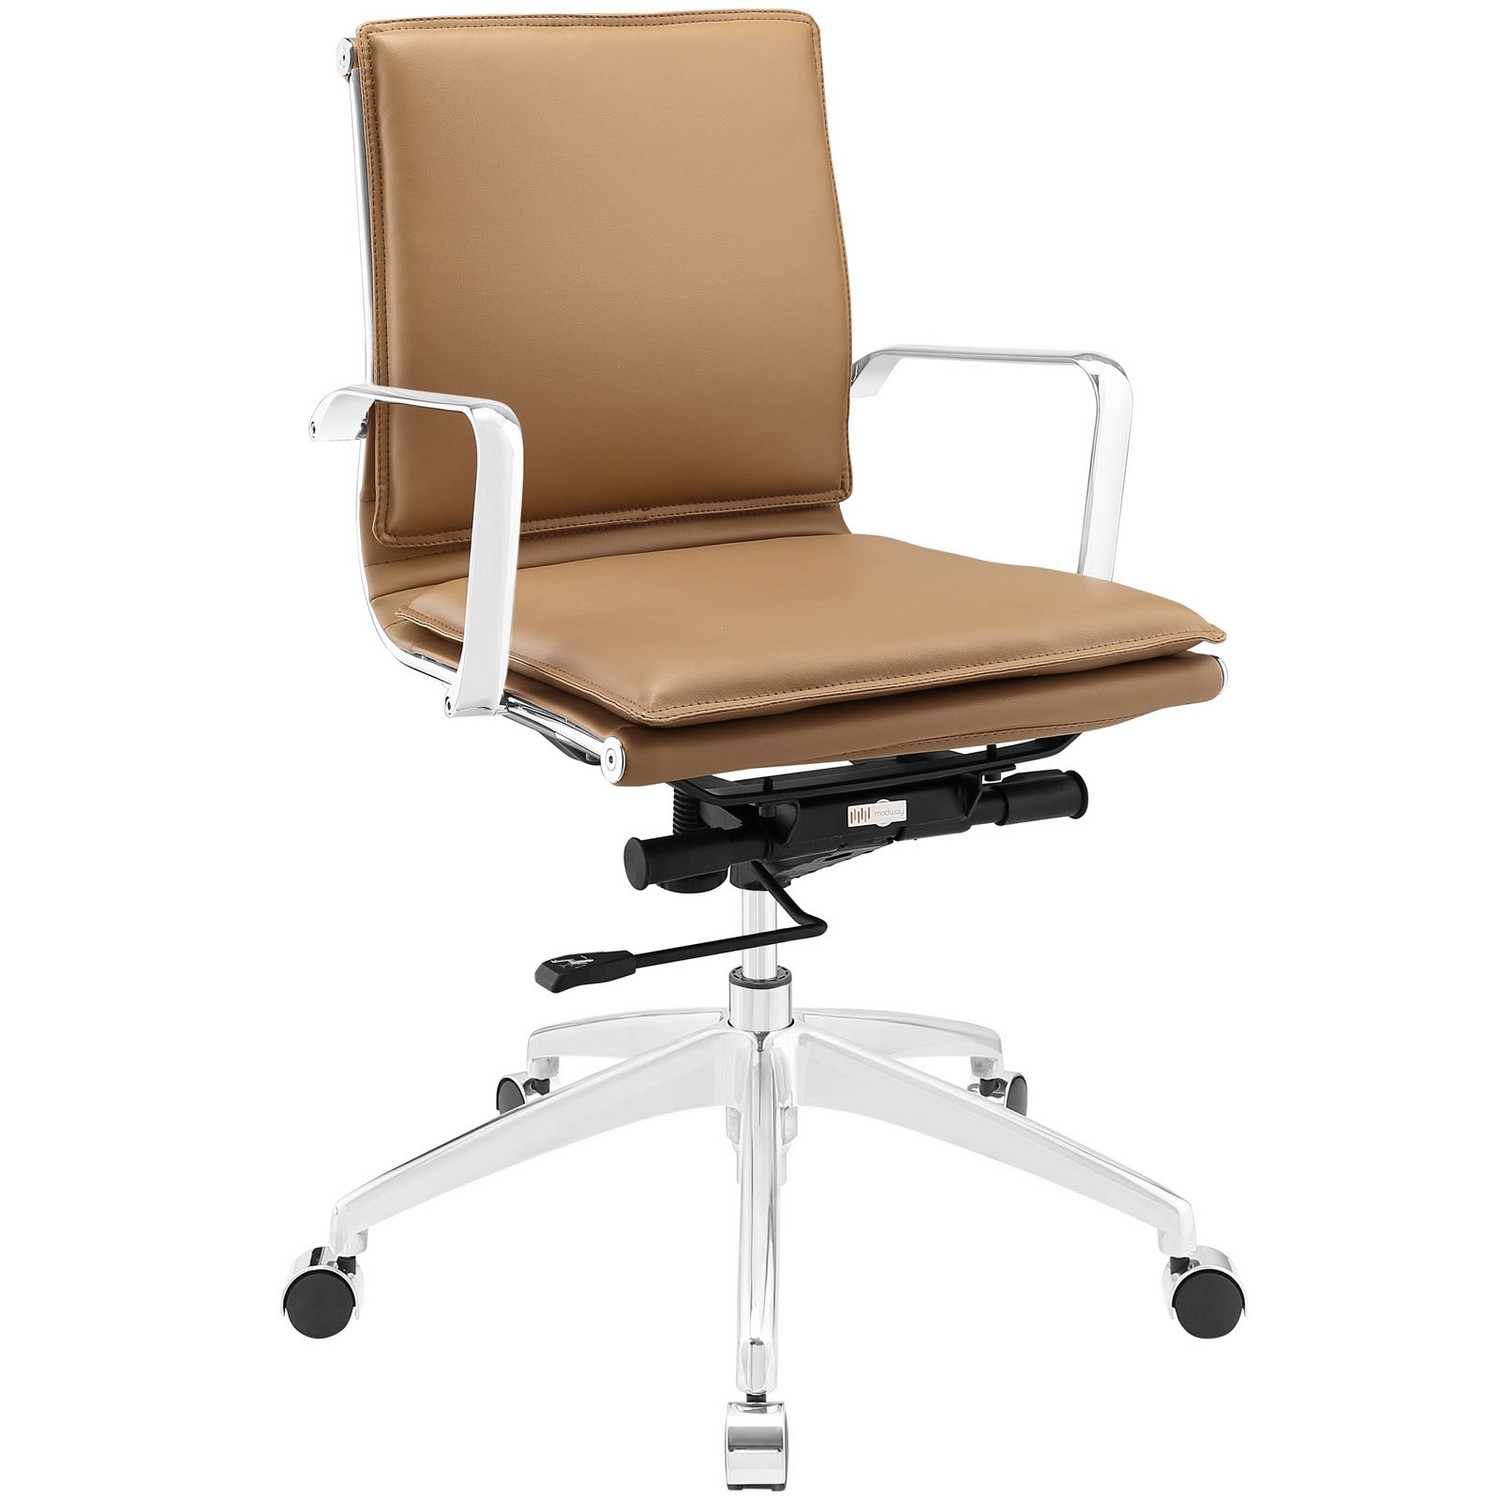 Modway Sage Mid Back Office Chair - Tan